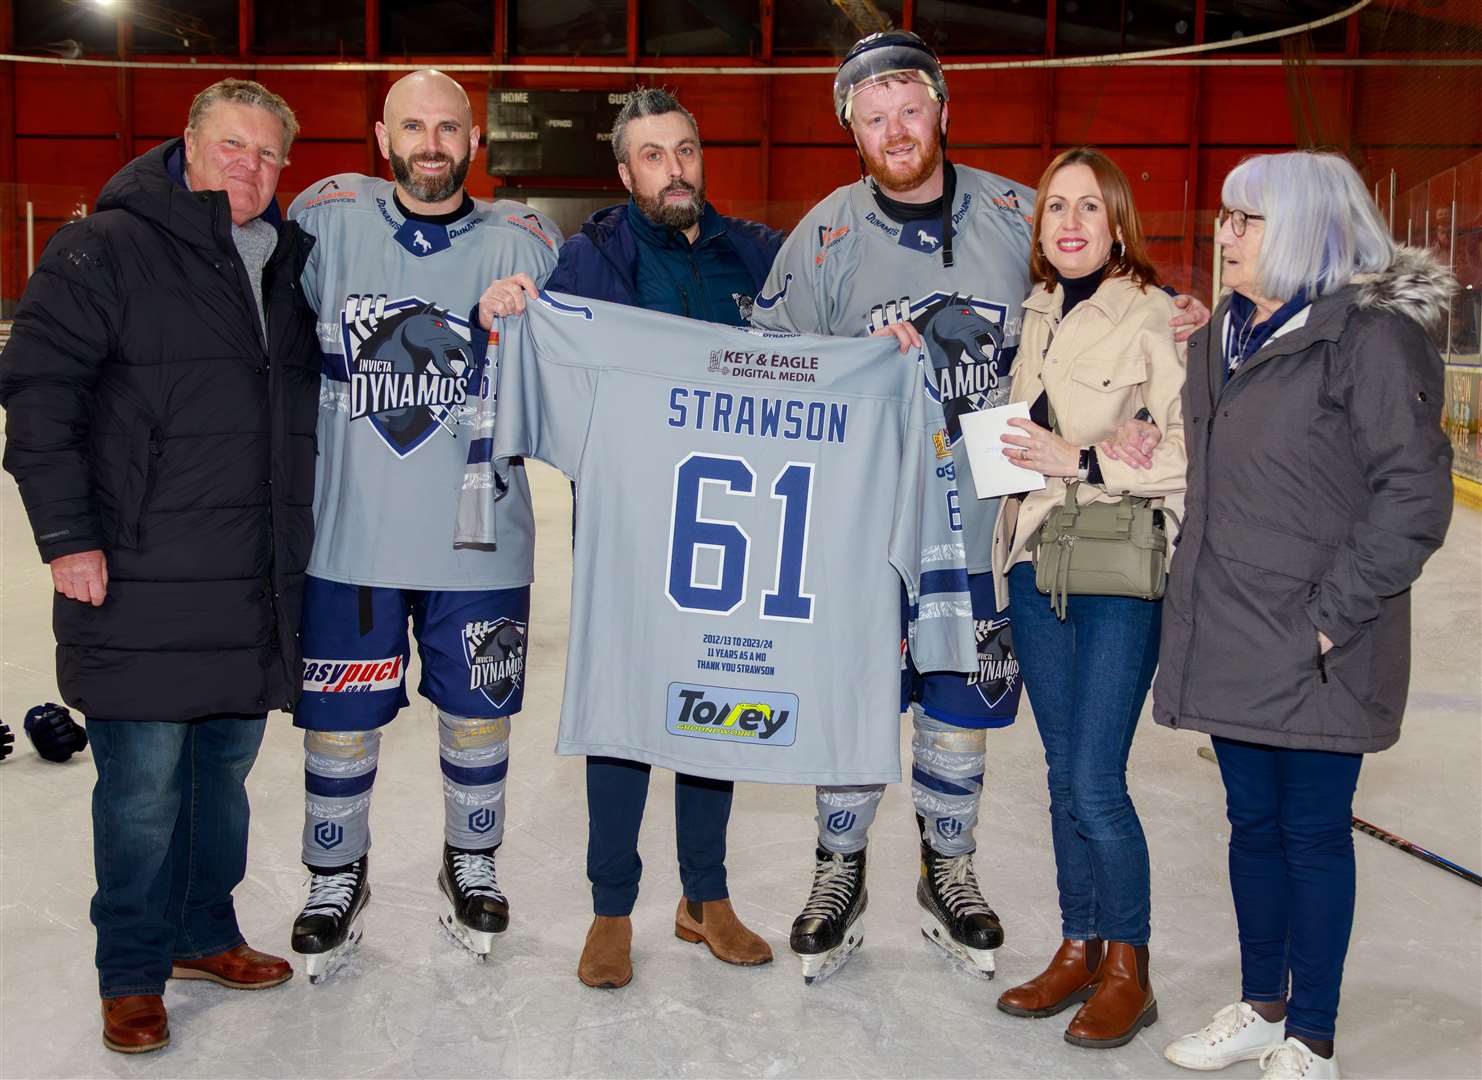 Invicta Dynamos have retired Arran Strawson’s number following his decision to call it a day Picture: David Trevallion